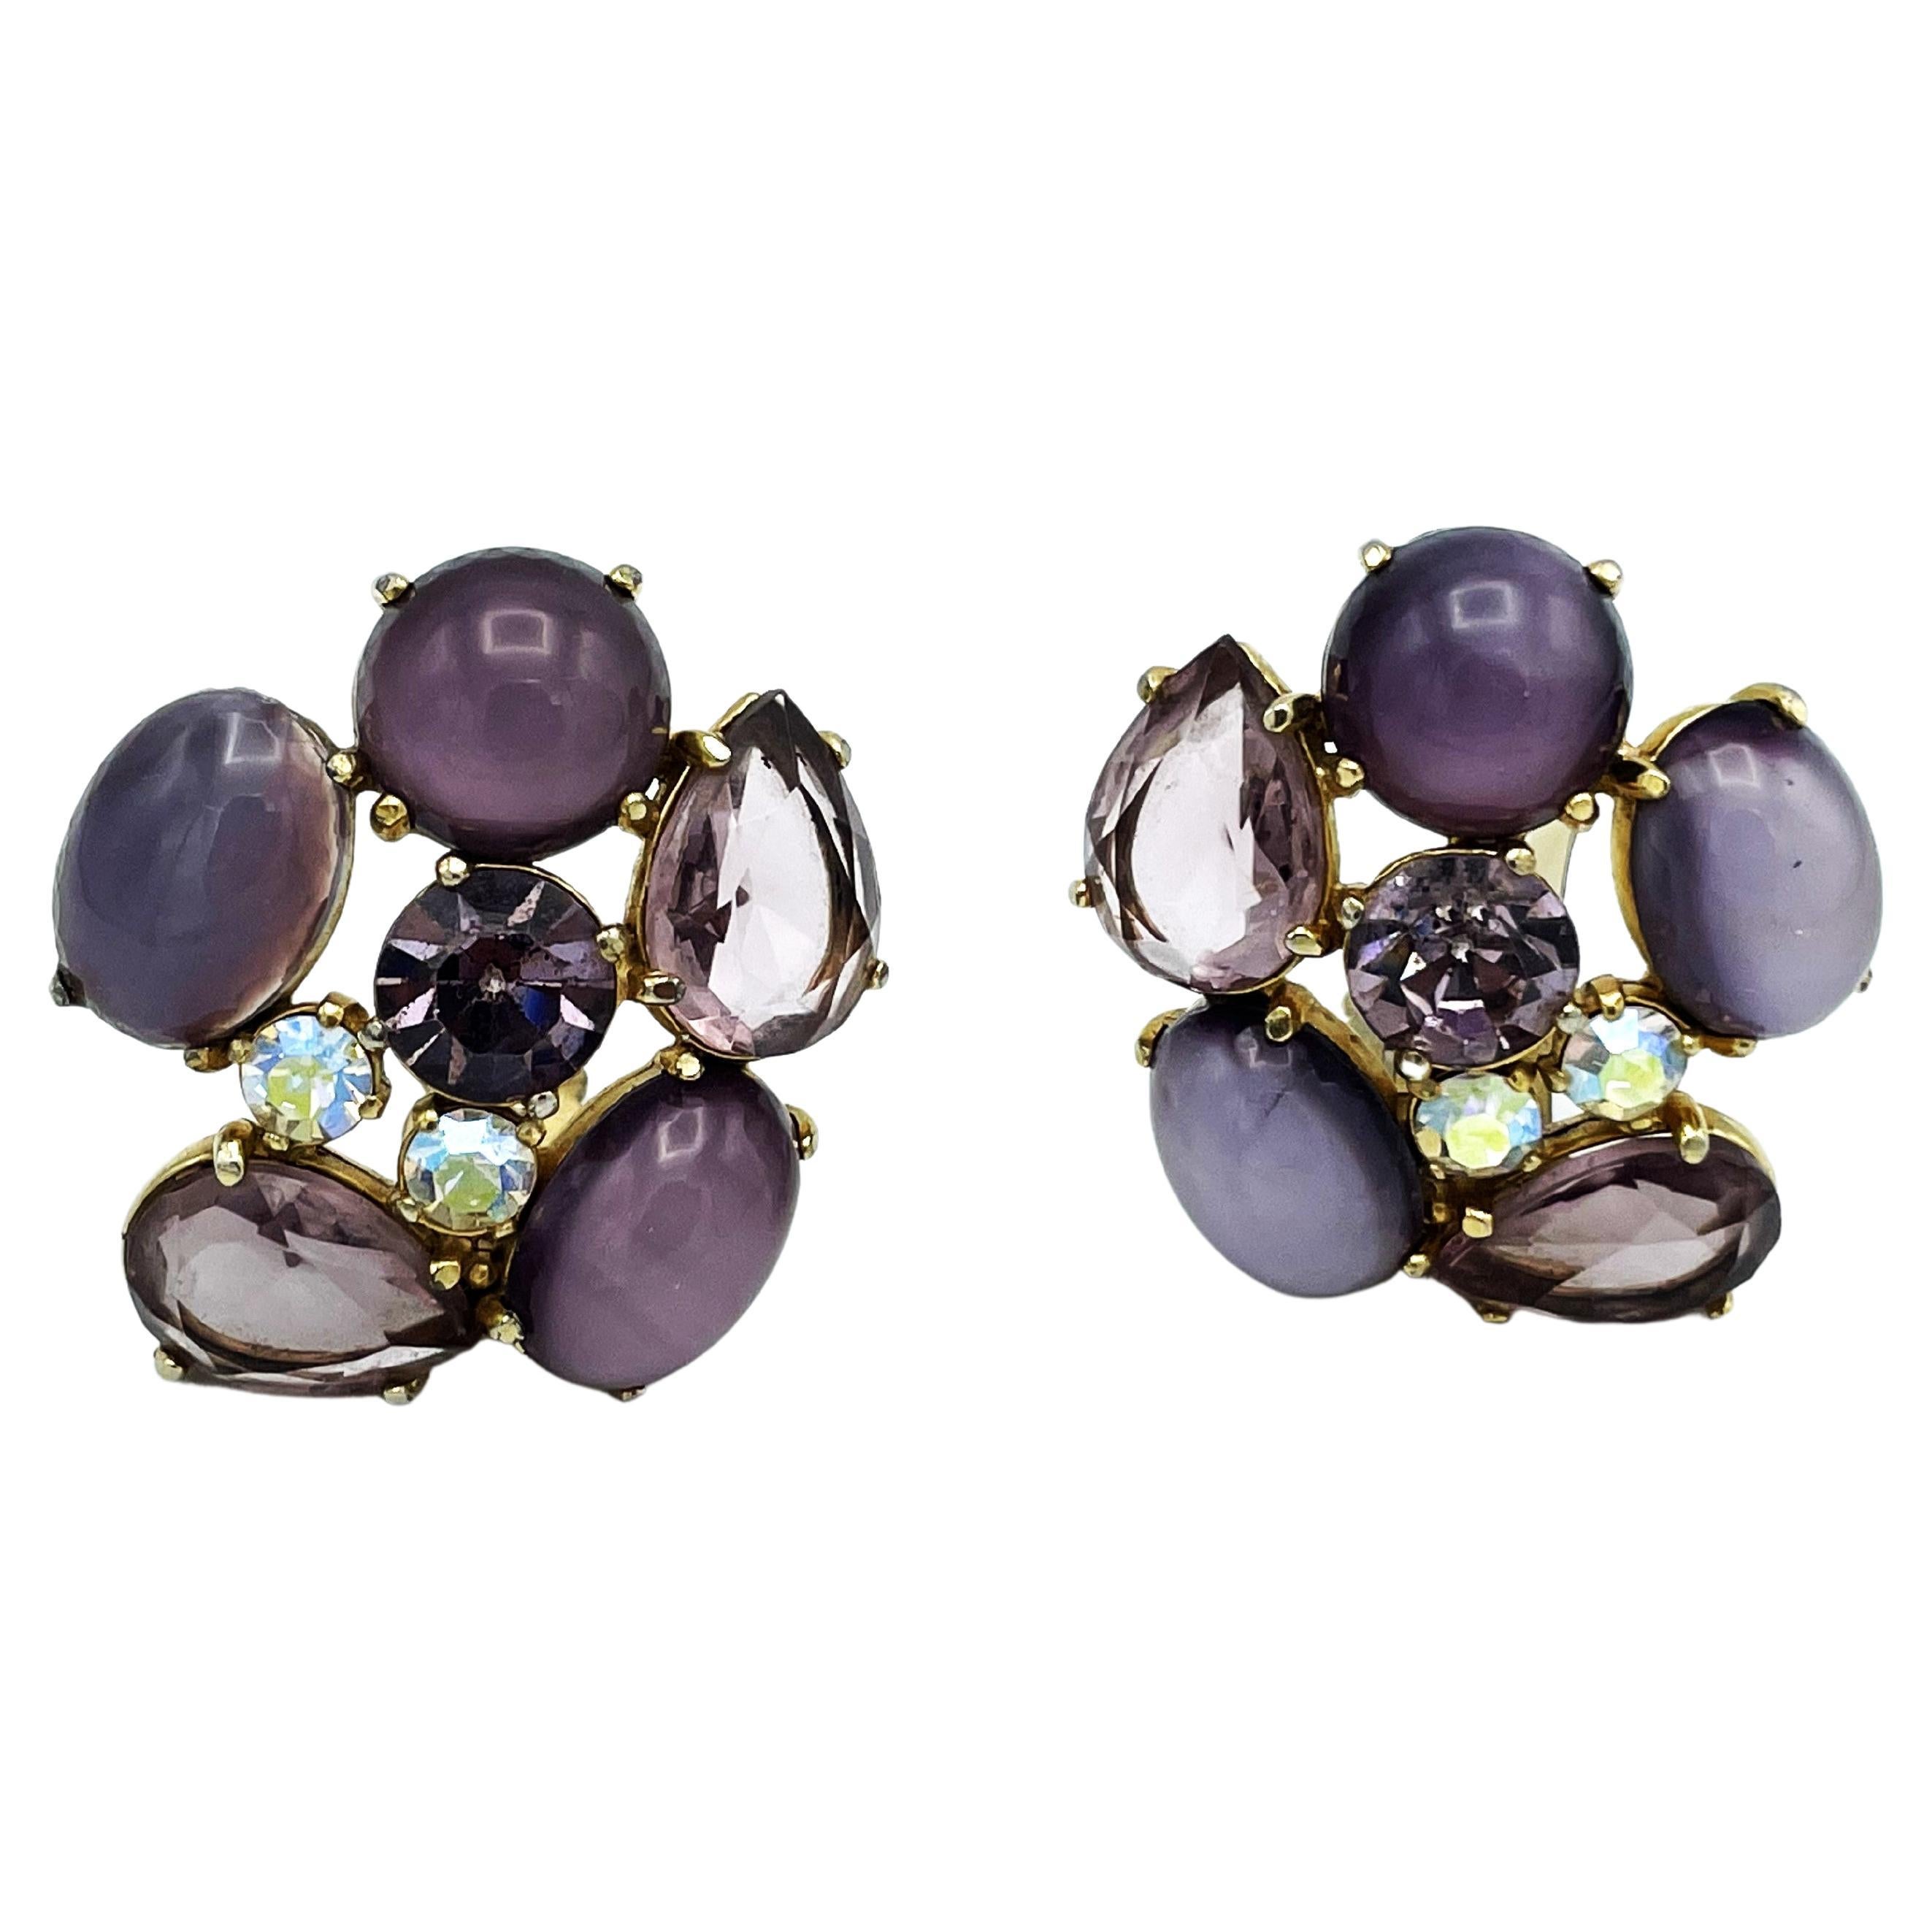 Vintage ear clips consisting of light purple round and cut large and small rhinestones, designed by Schiaparelli Italy 1950s.
Measurement
Height 4,5 cm  x  Width 4 cm, the largest stone 1,8 cm x 1,3 cm, the clear round stone in the middle 1 cm in